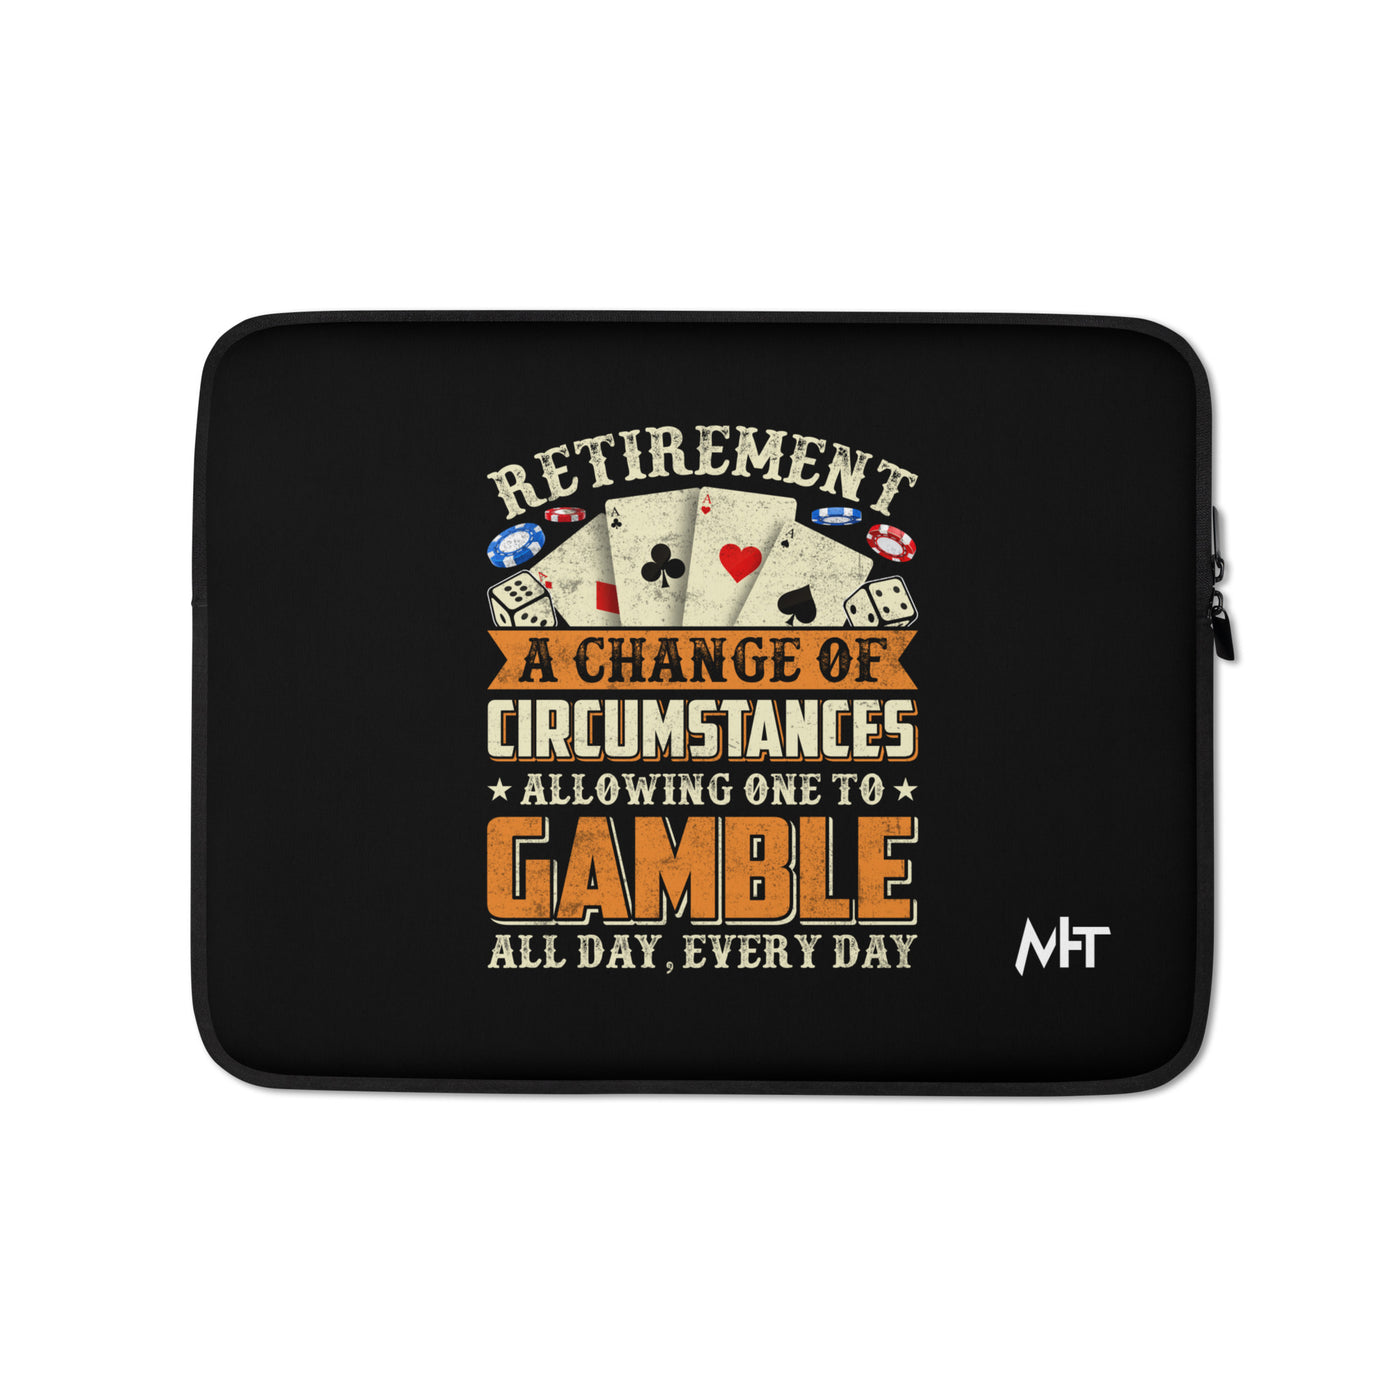 Retirement ; a Change of Circumstance allowing One to Gamble all day everyday - Laptop Sleeve